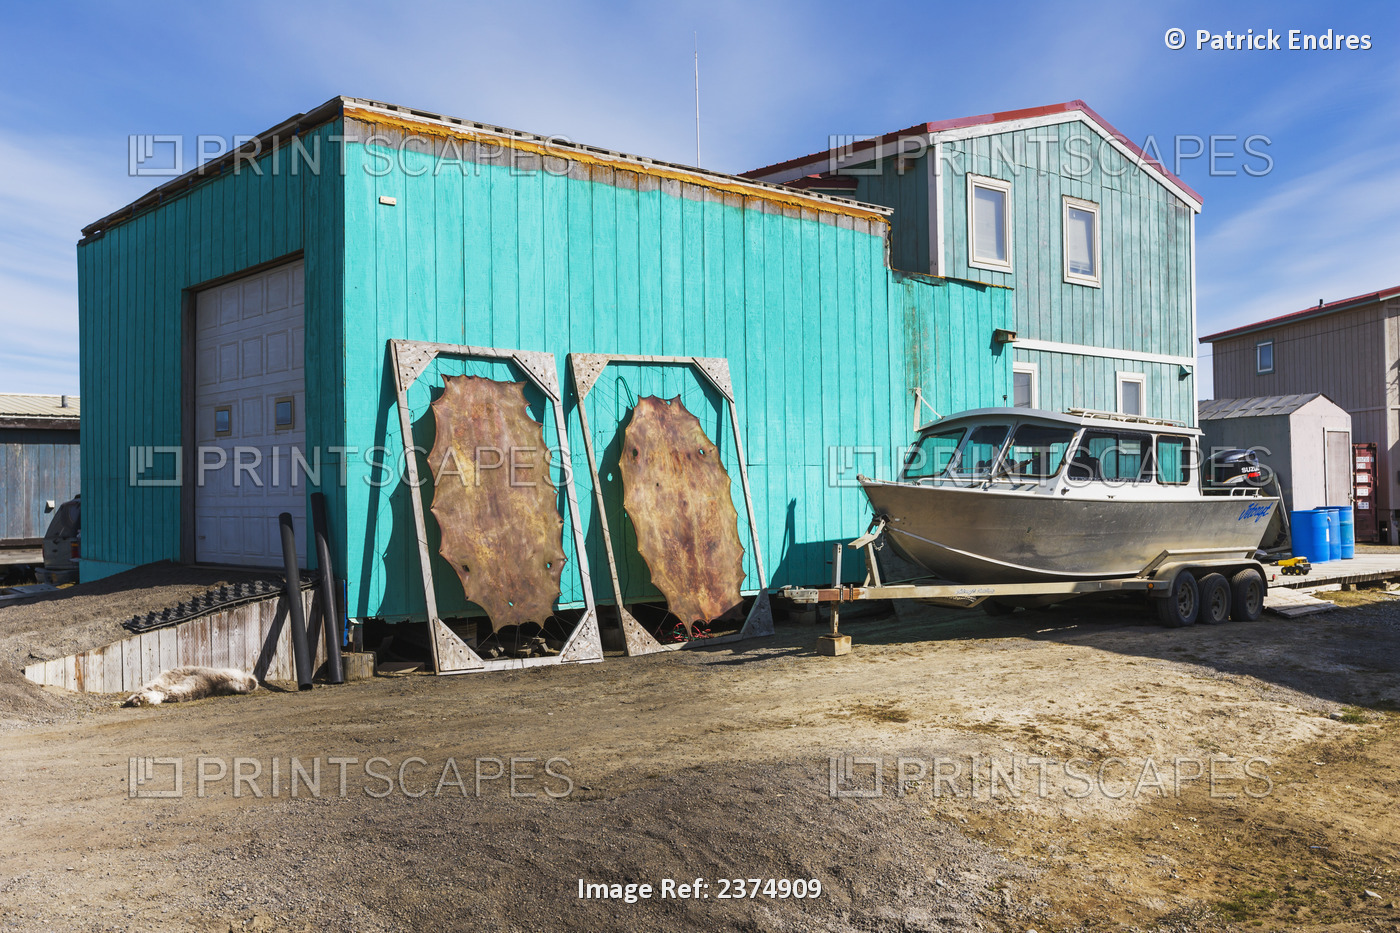 Seal Skins Dry On A Stretcher Against A Building In Barrow, Arctic Alaska.